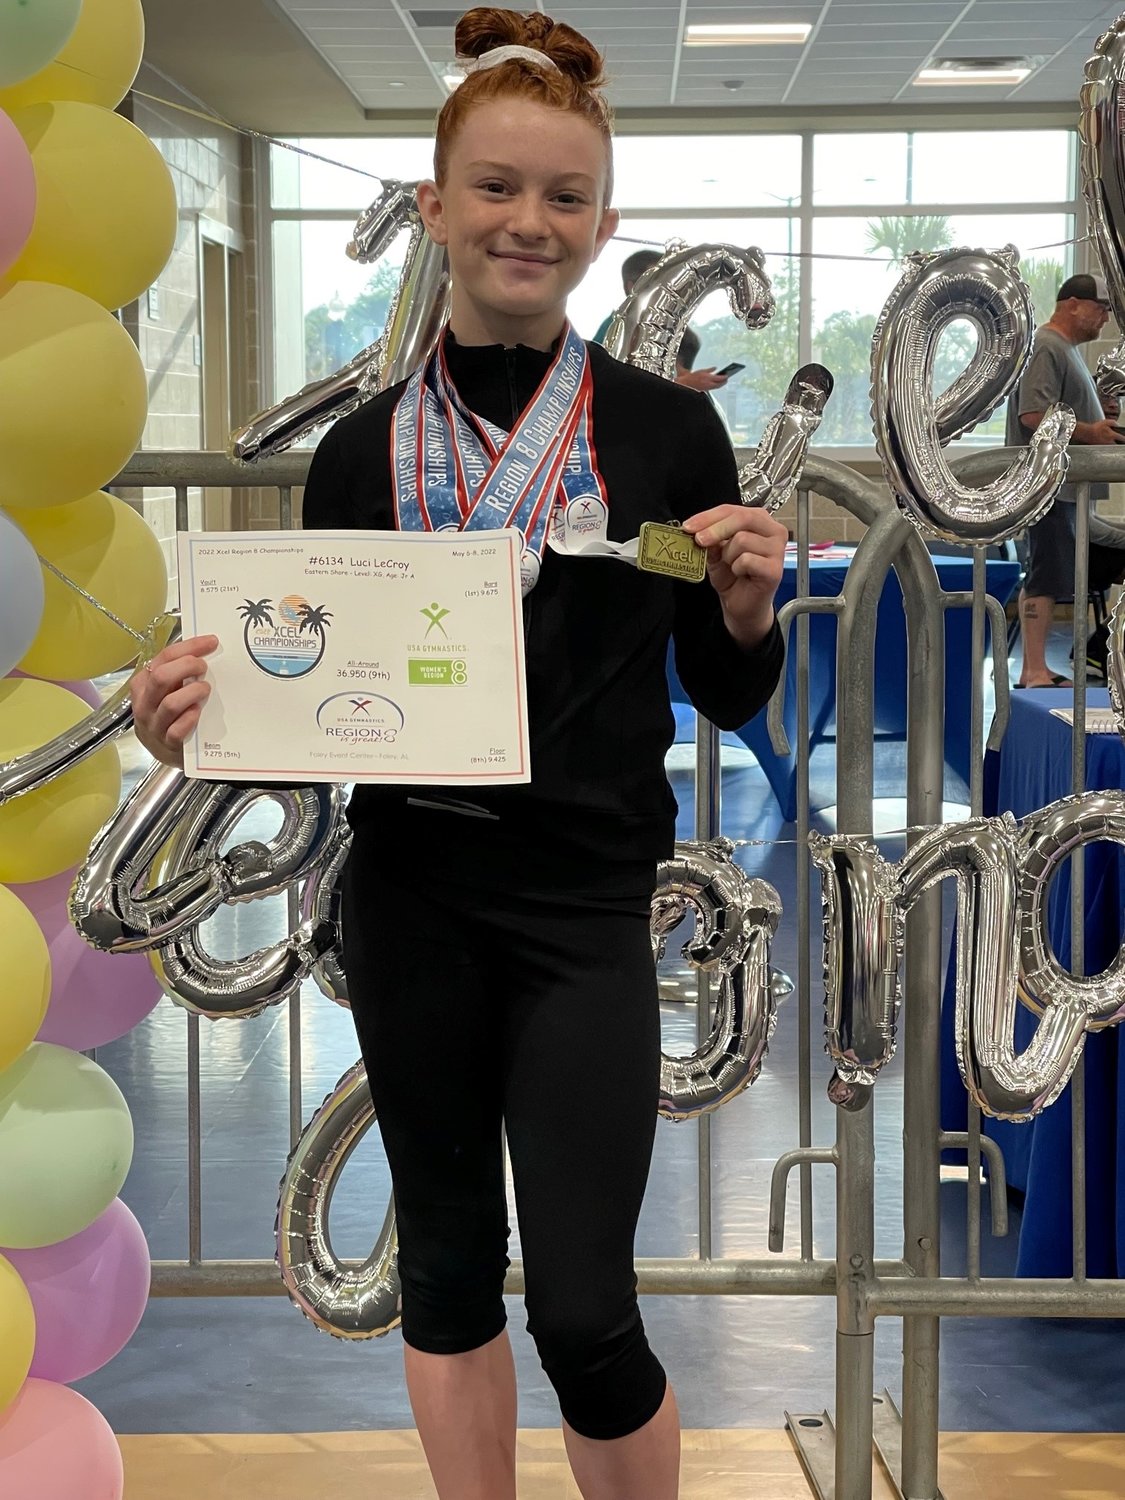 Eastern Shore Gymnastics Academy gymnast Luci LeCroy, age 11 of Fairhope won the gym’s first ever Regional gold medal on the uneven bars Friday, May 6 in the Xcel Gold level.